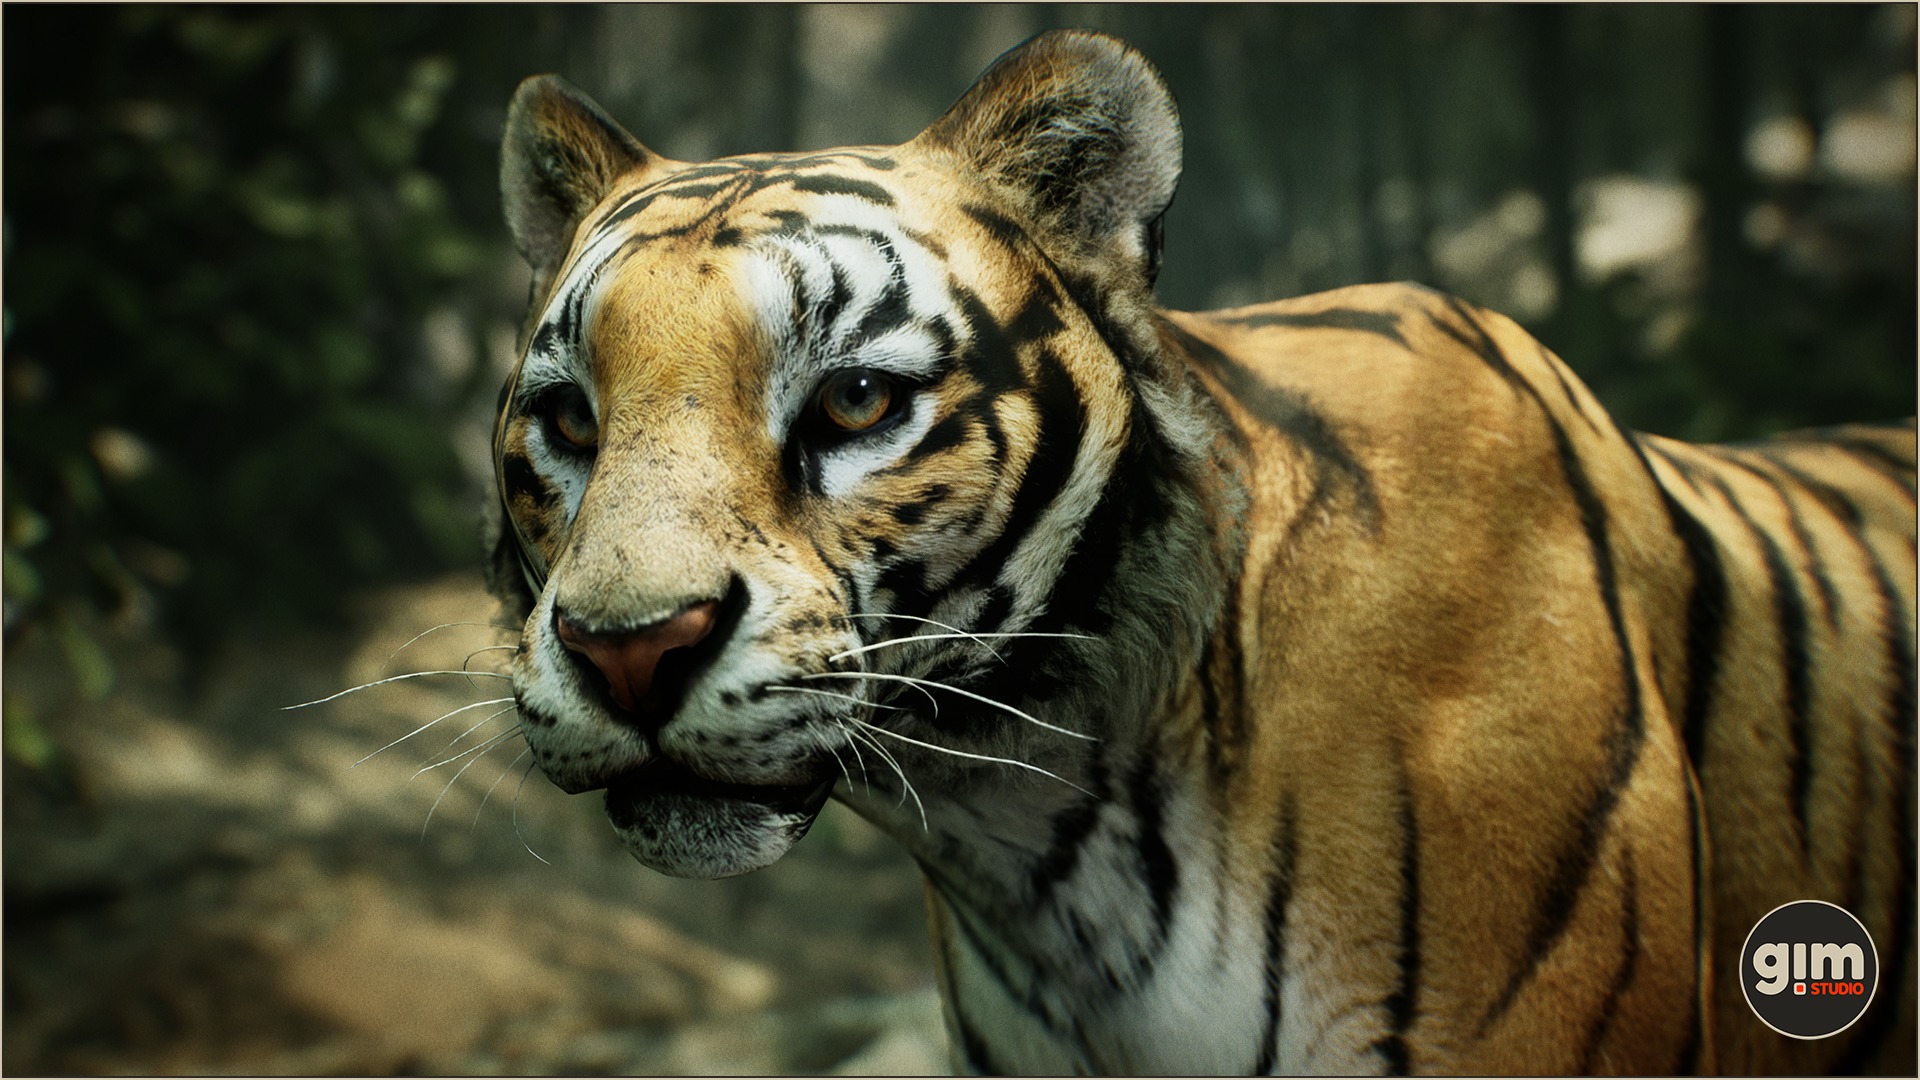 Male tiger looking seriously in a close-up photo